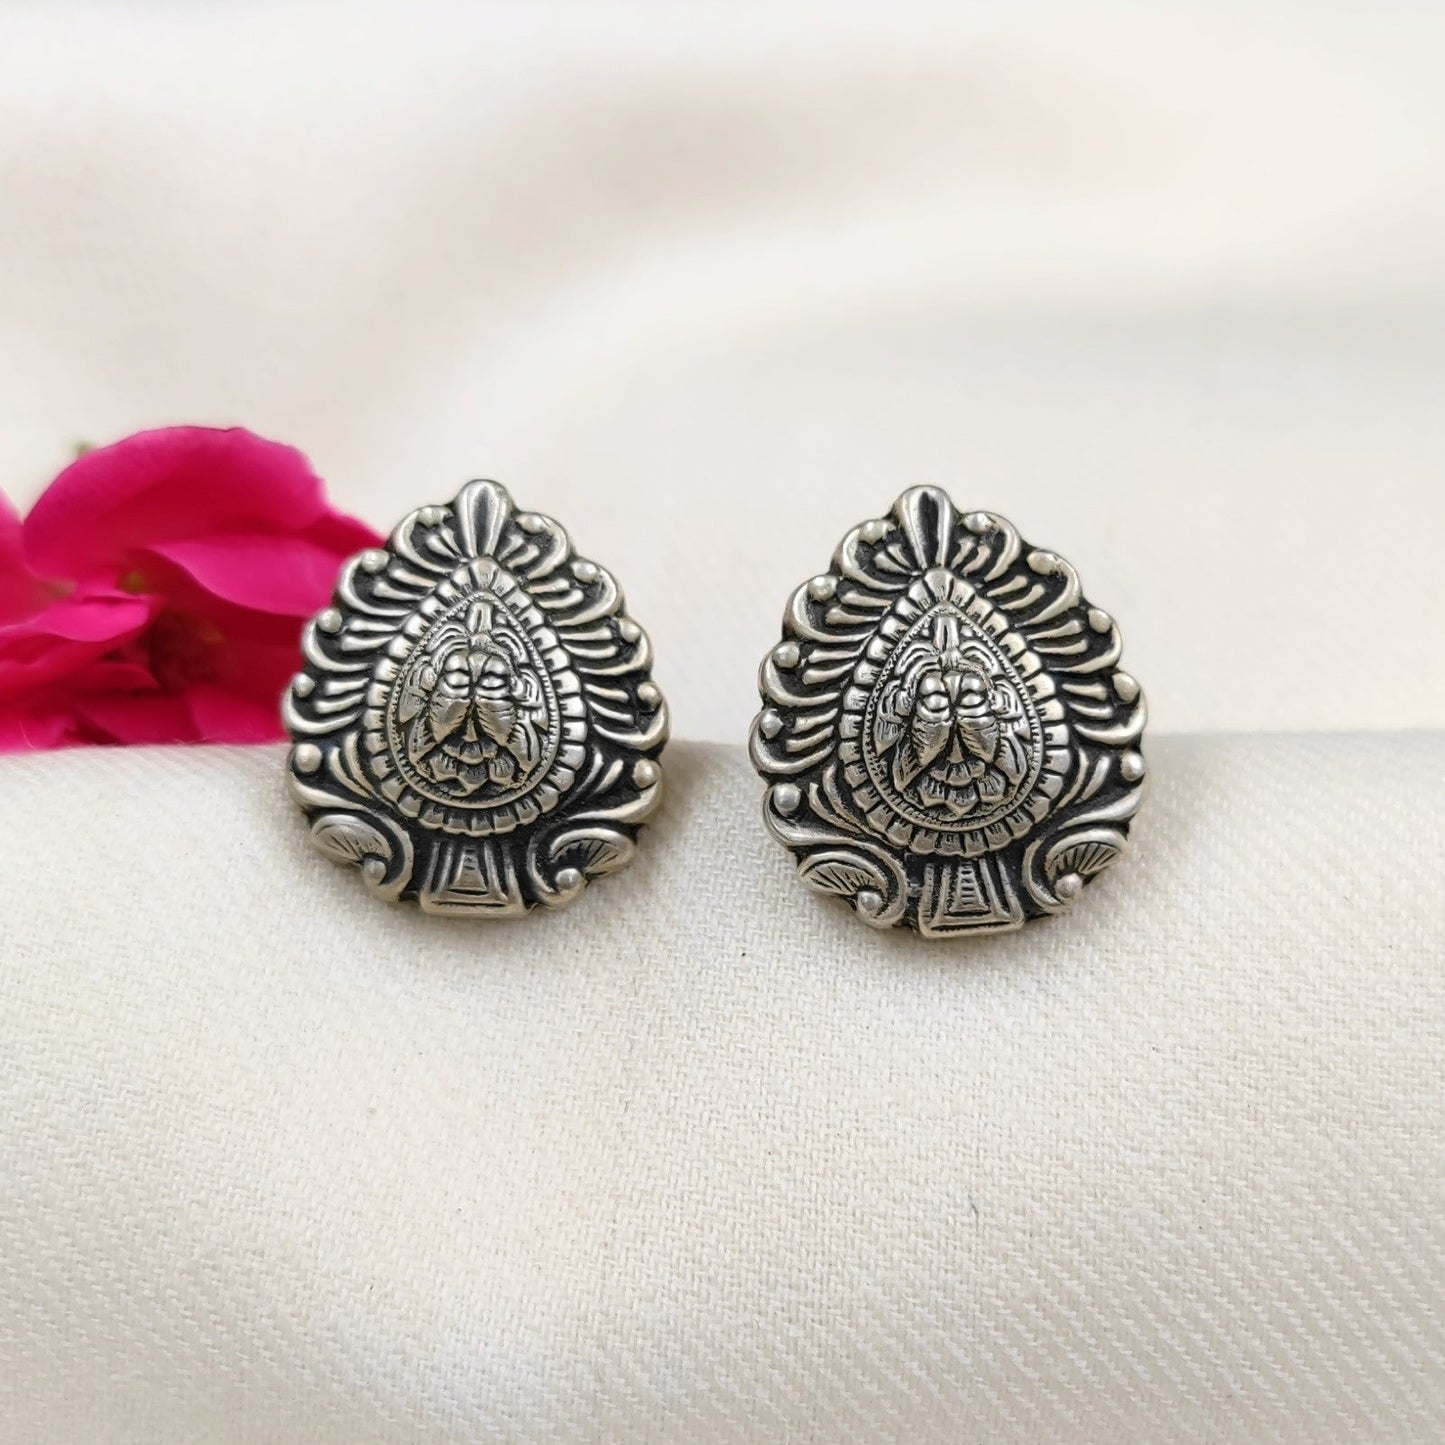 Silver Jewelry Earrings by Jauhri 92.5 Silver - Chitra Studs